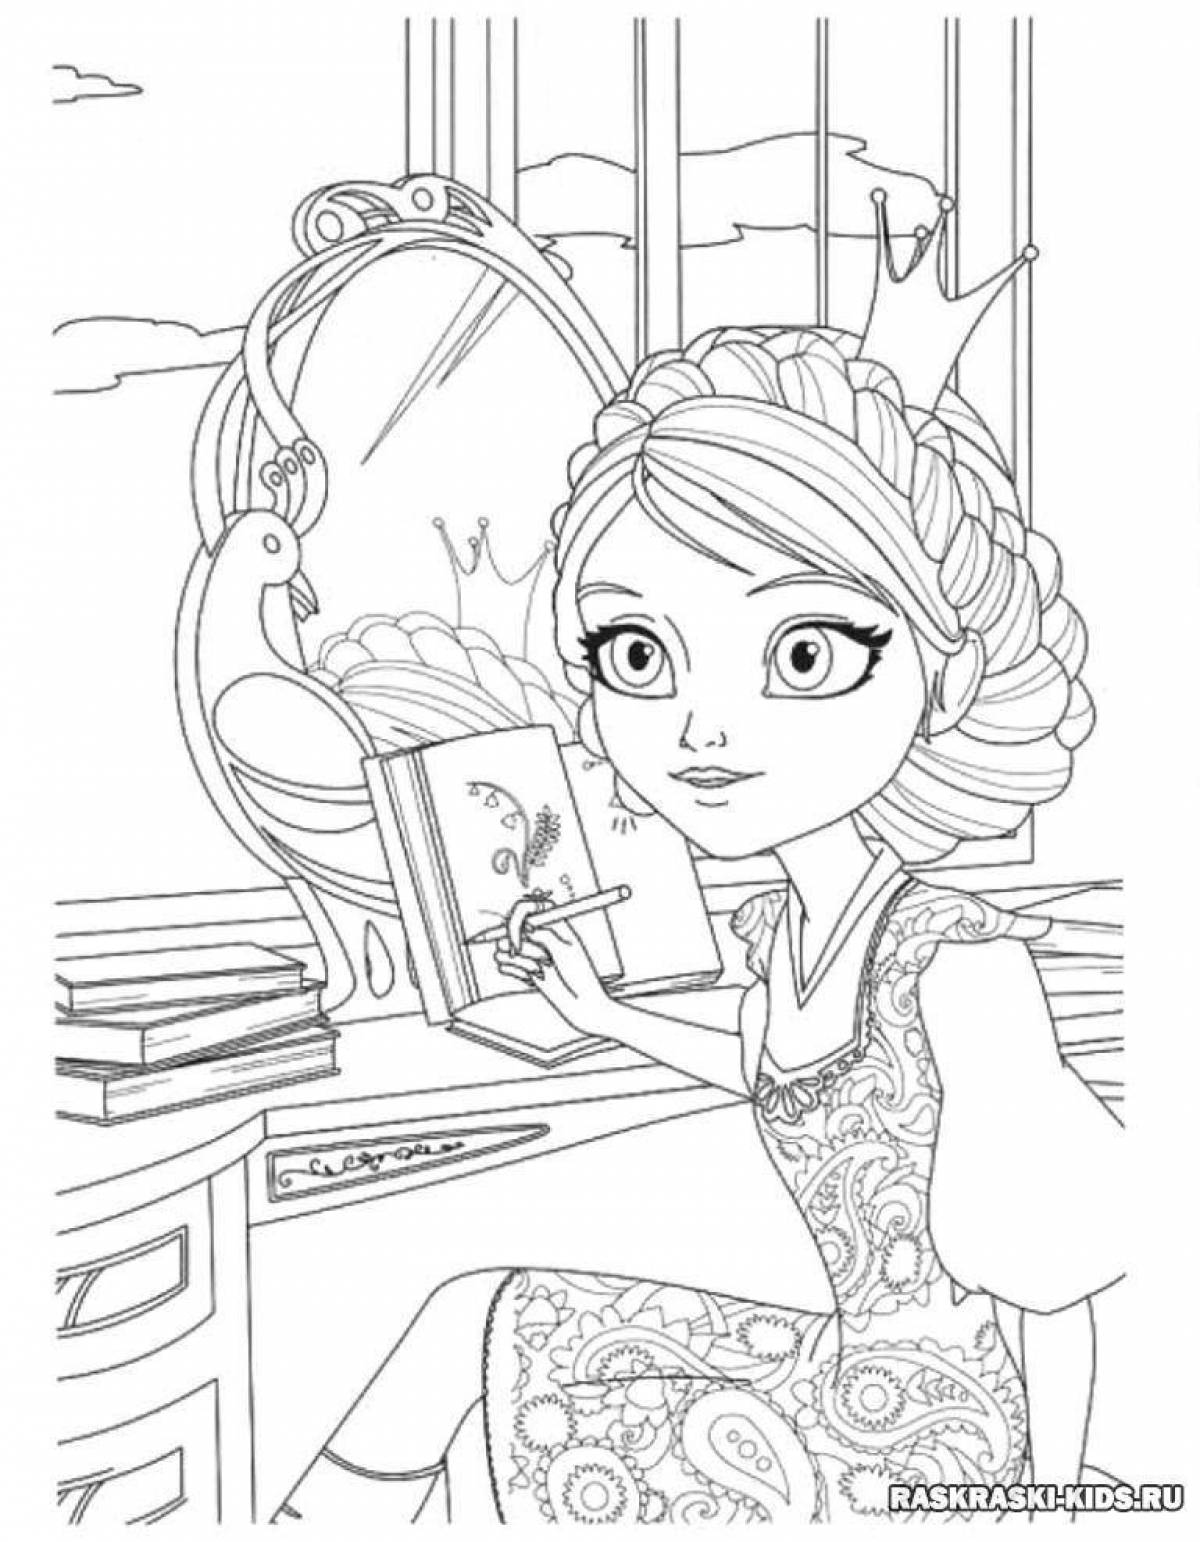 Awesome princess coloring book